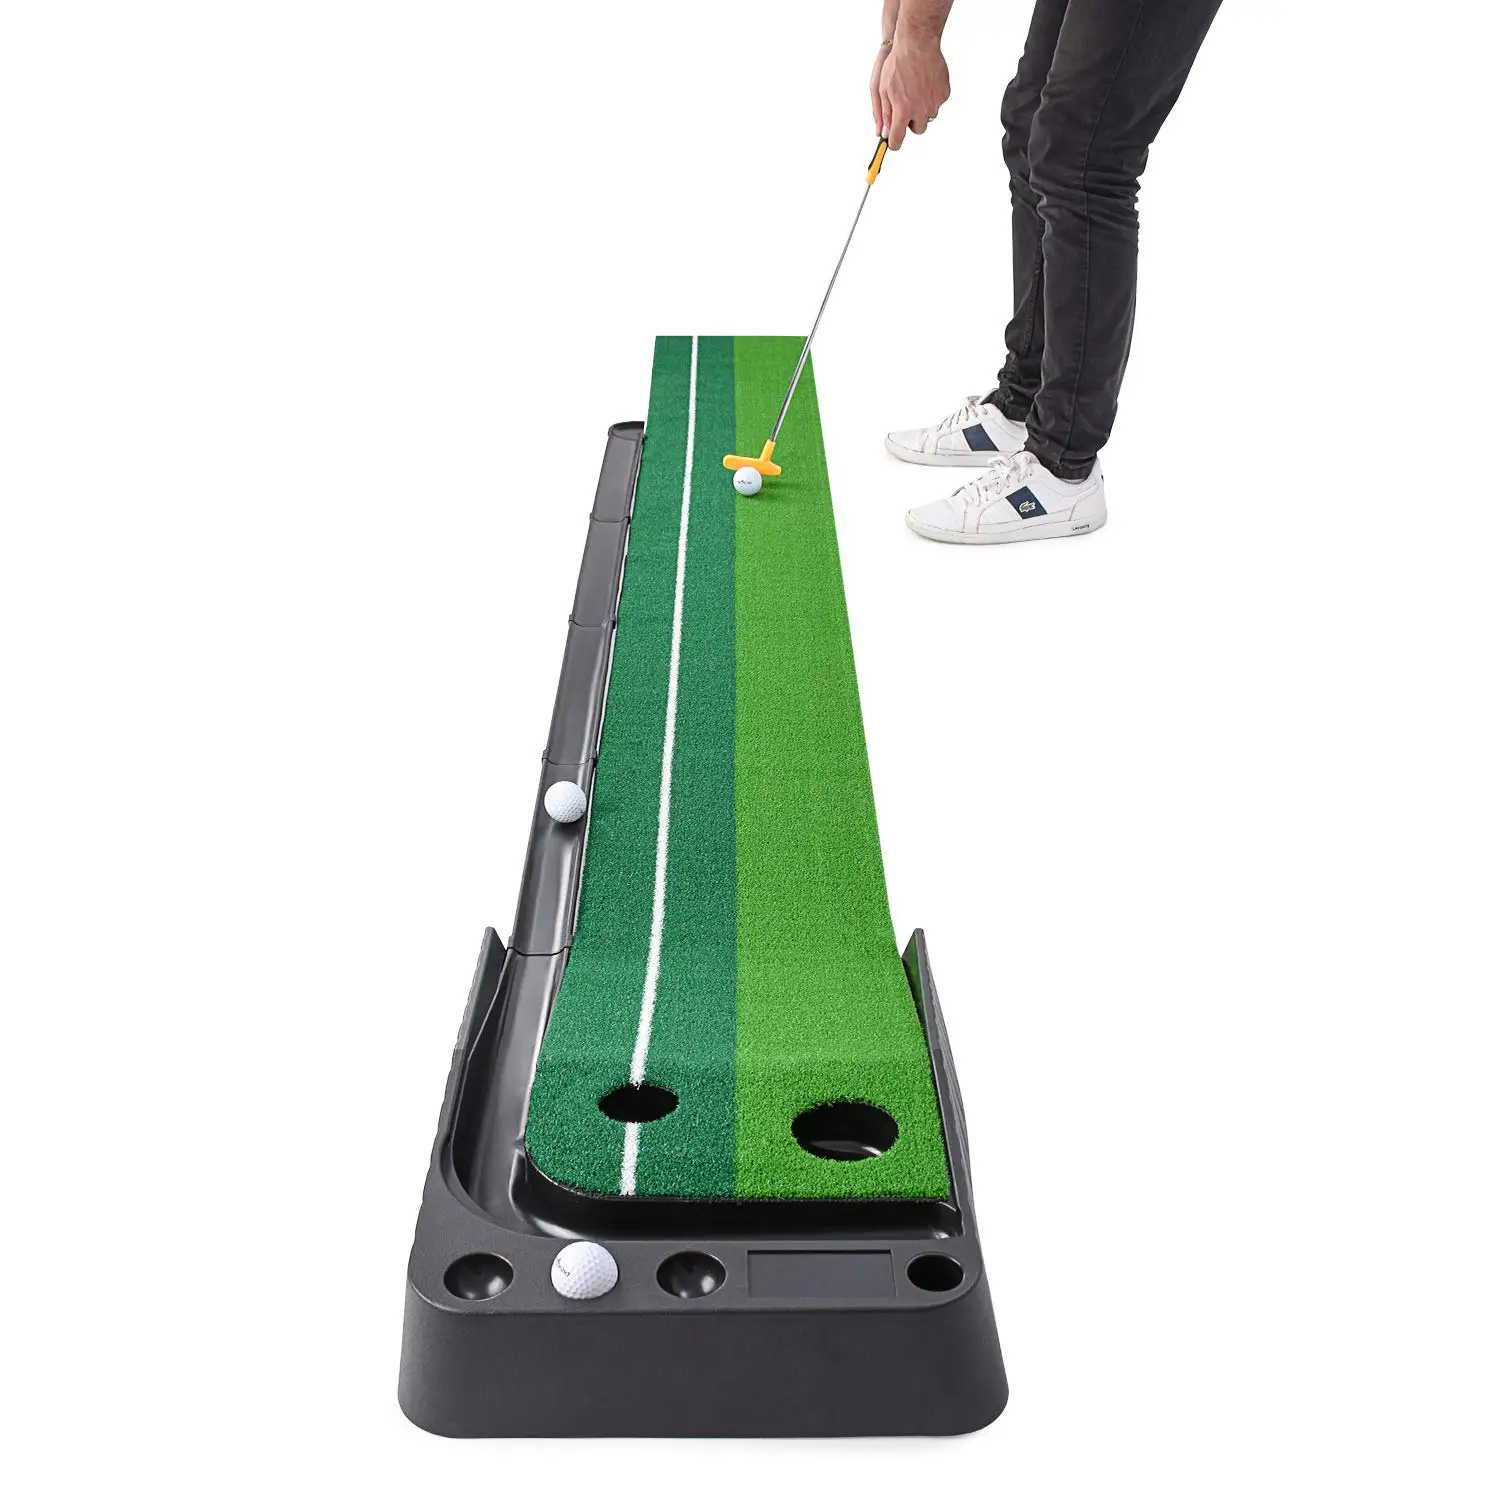 

Indoor Golf Putting Green Portable Mat with Auto Ball Return Function Mini Golf Practice Training Aid, Game and Gift